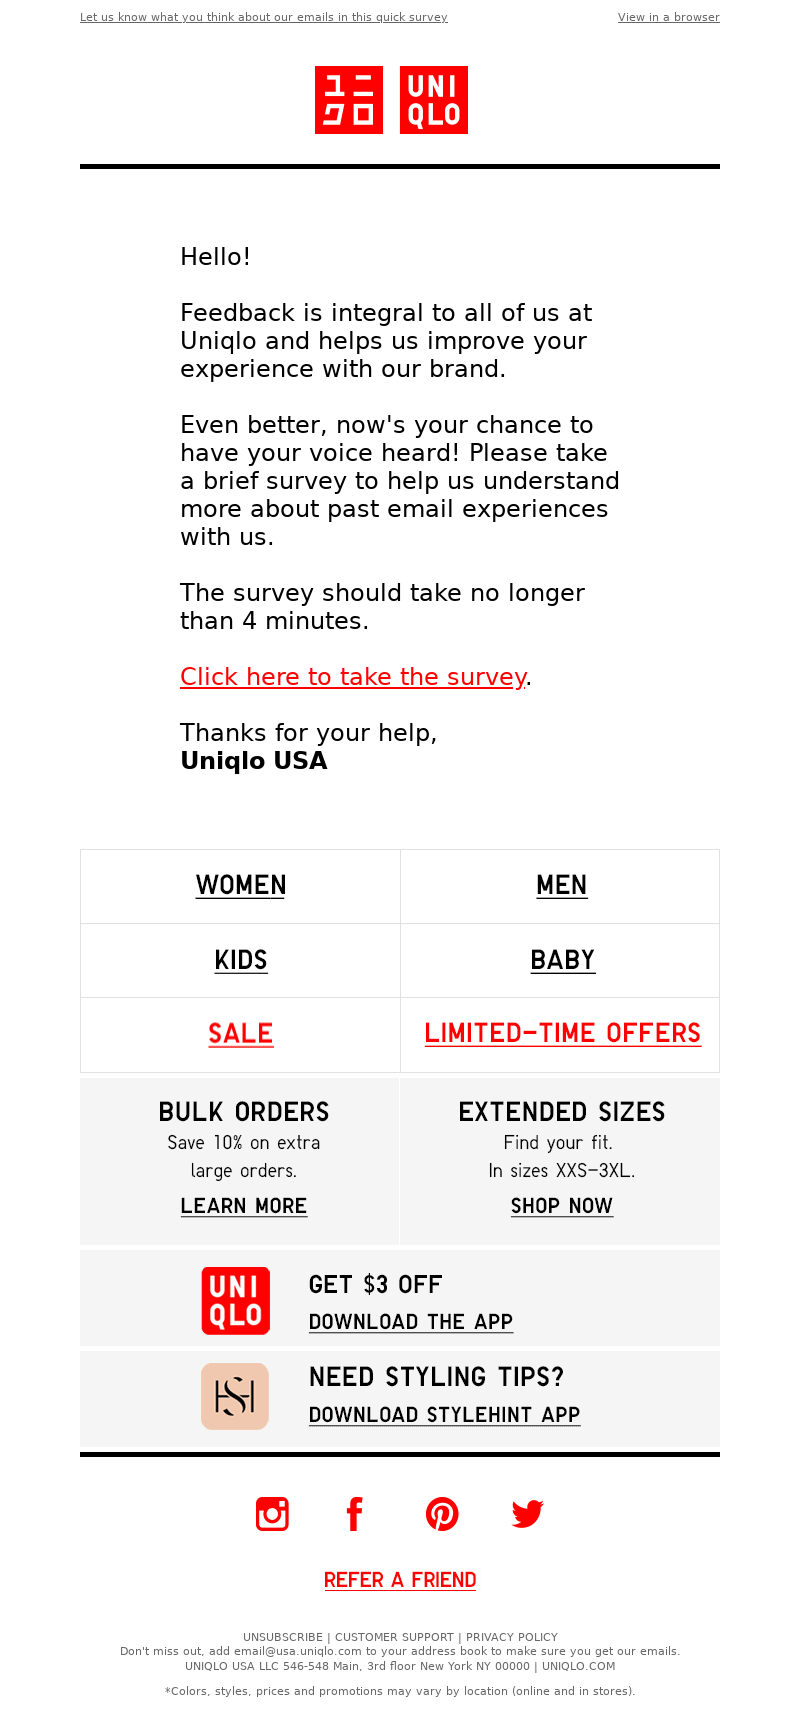 UNIQLO, ‘We want to hear from you’, feedback request email.